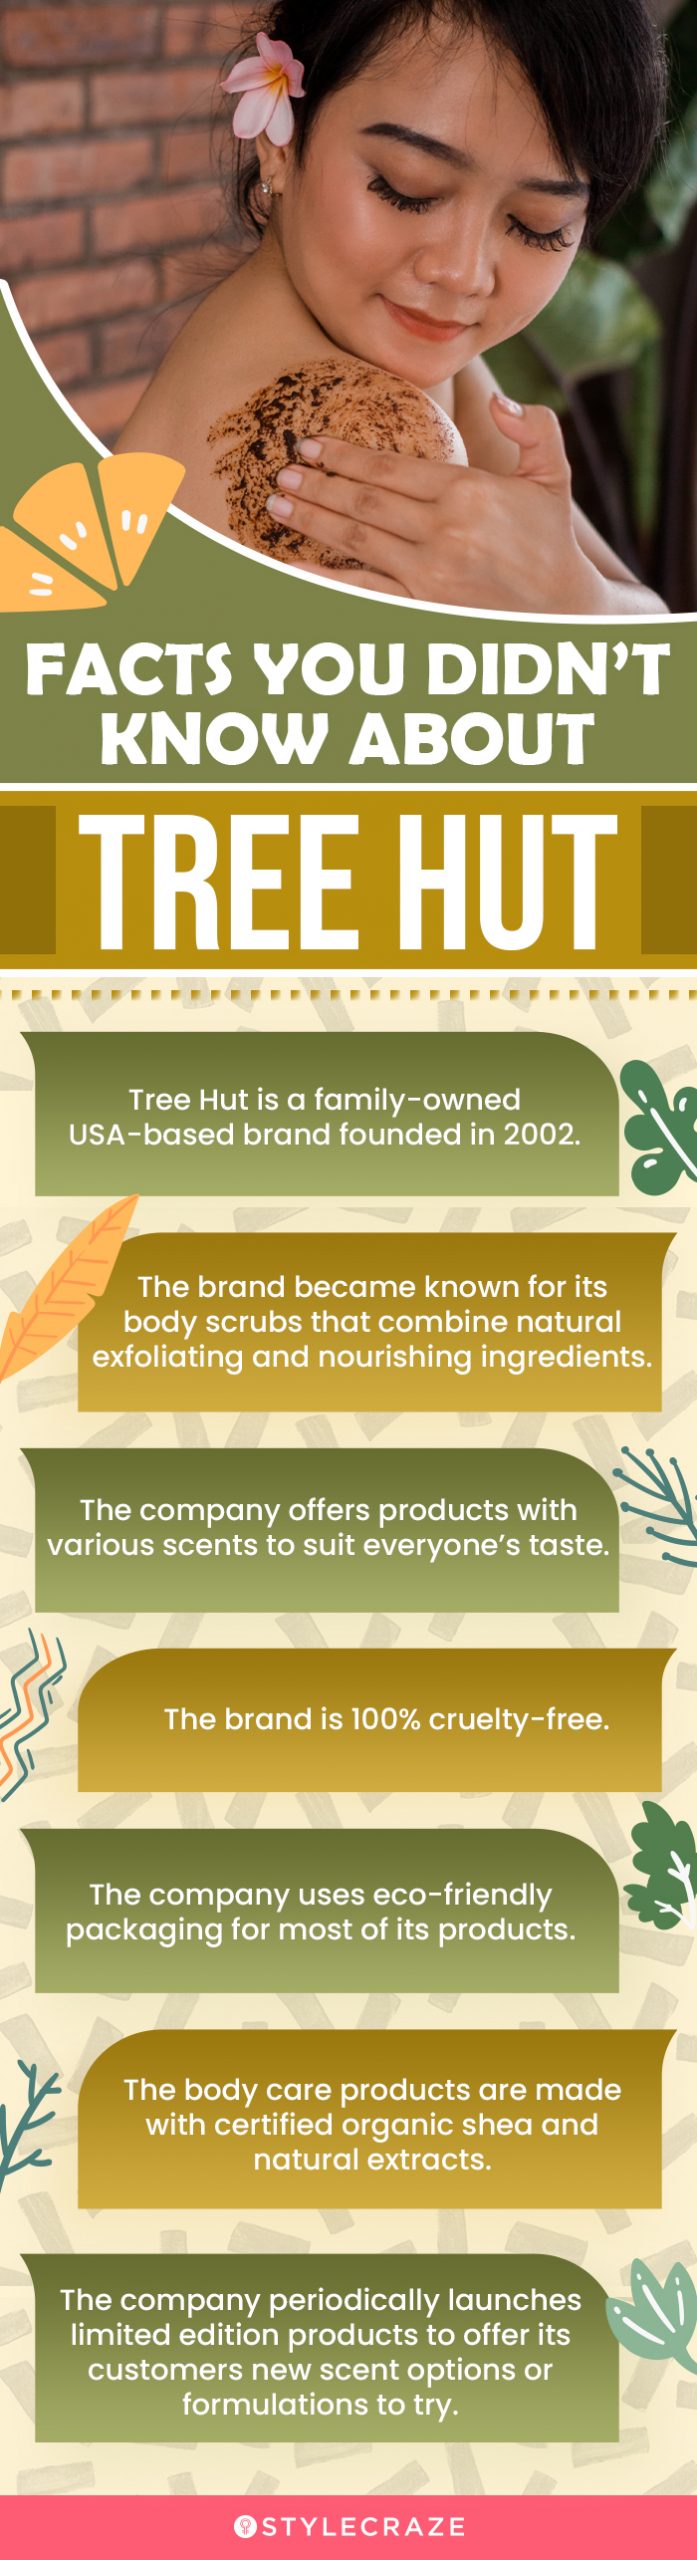 Facts You Didn’t Know About Tree Hut (infographic)